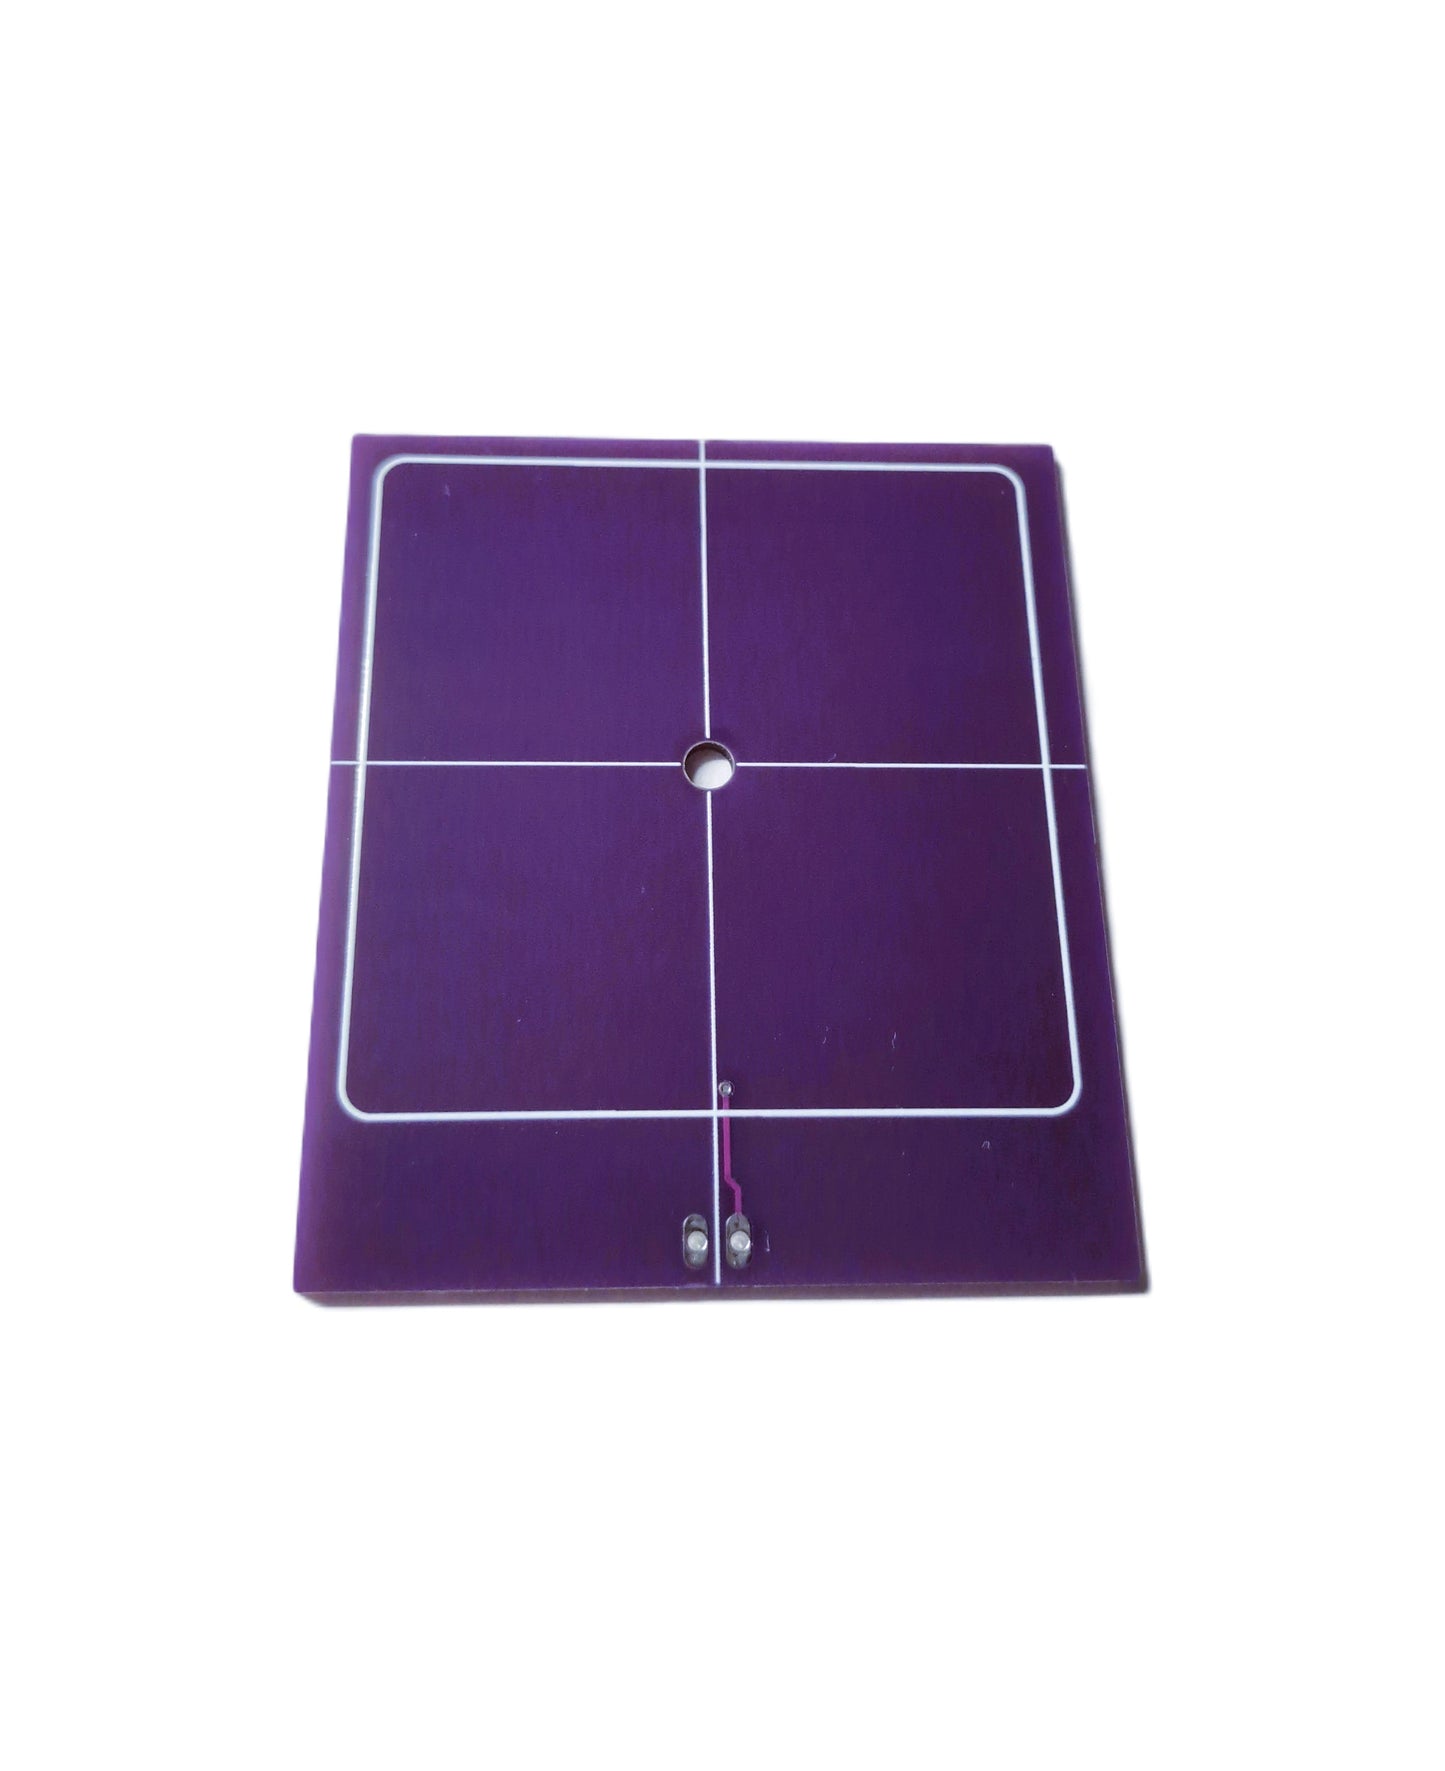 NFC Antenna for EMVCo and point of sales terminals